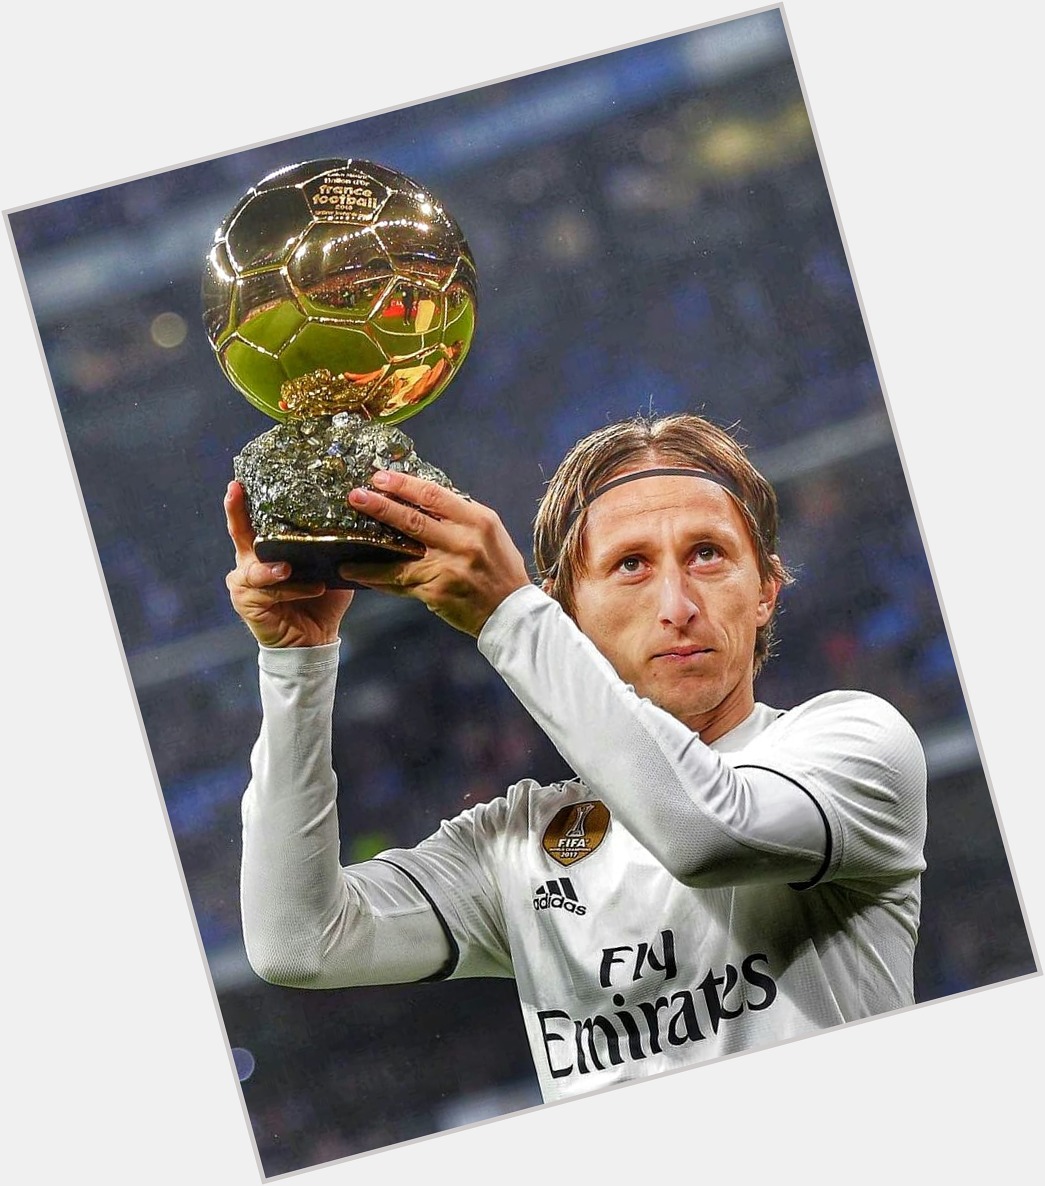 Happy birthday to Luka Modric, who turns 34 today. One of the best midfielders of all time. Legend 